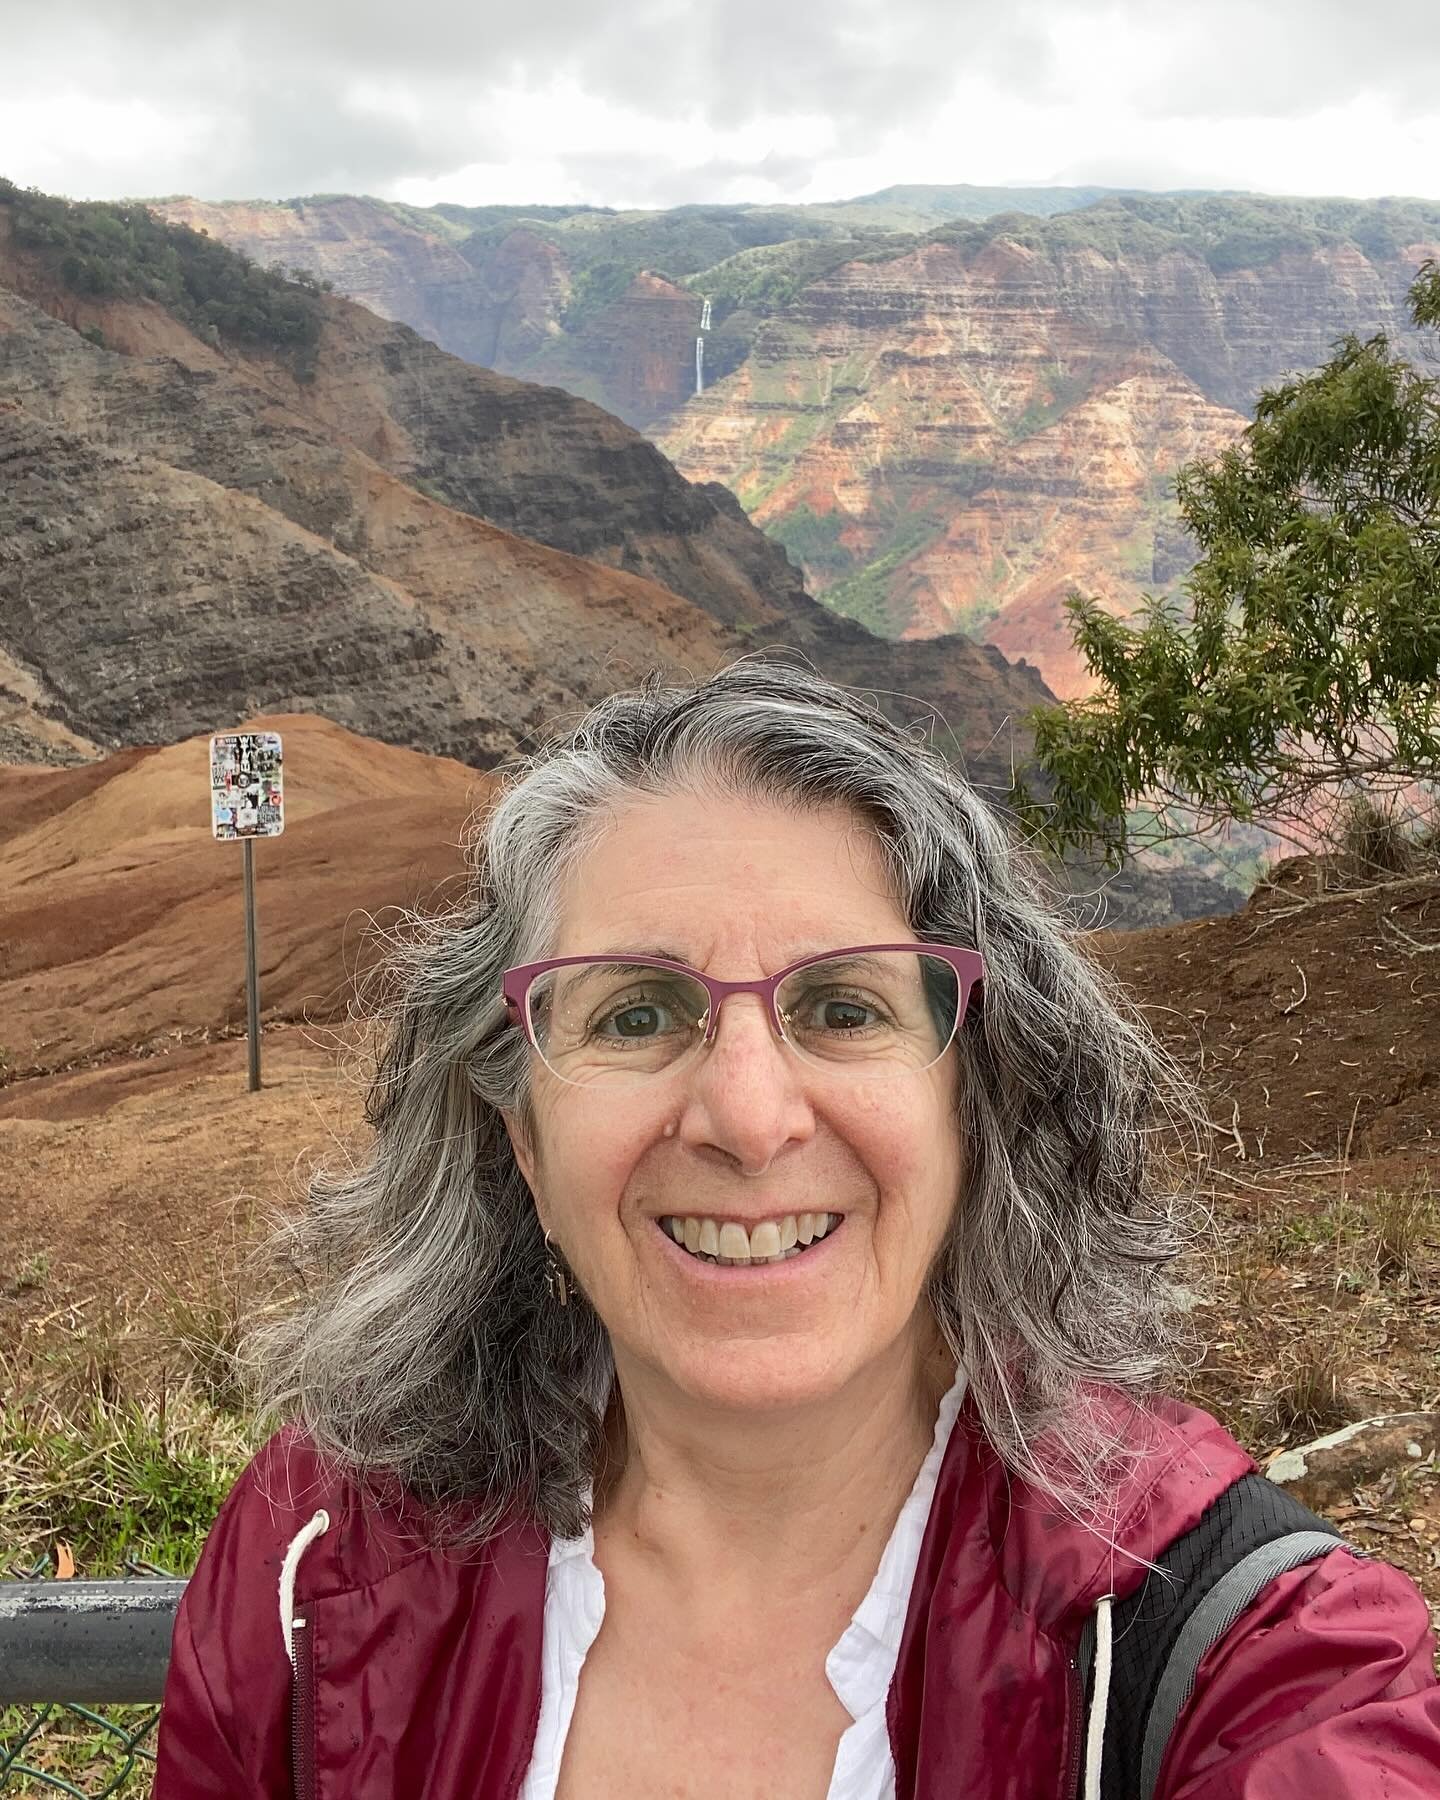 HI FROM KAUAI: I&rsquo;ve been to Hawaii before (a few times) but this is my first time on Kauai. There&rsquo;s so much beauty here, with lush, thick, and varied foliage, rich and wonderful soil and lots of red earth. The landscapes most impressive f